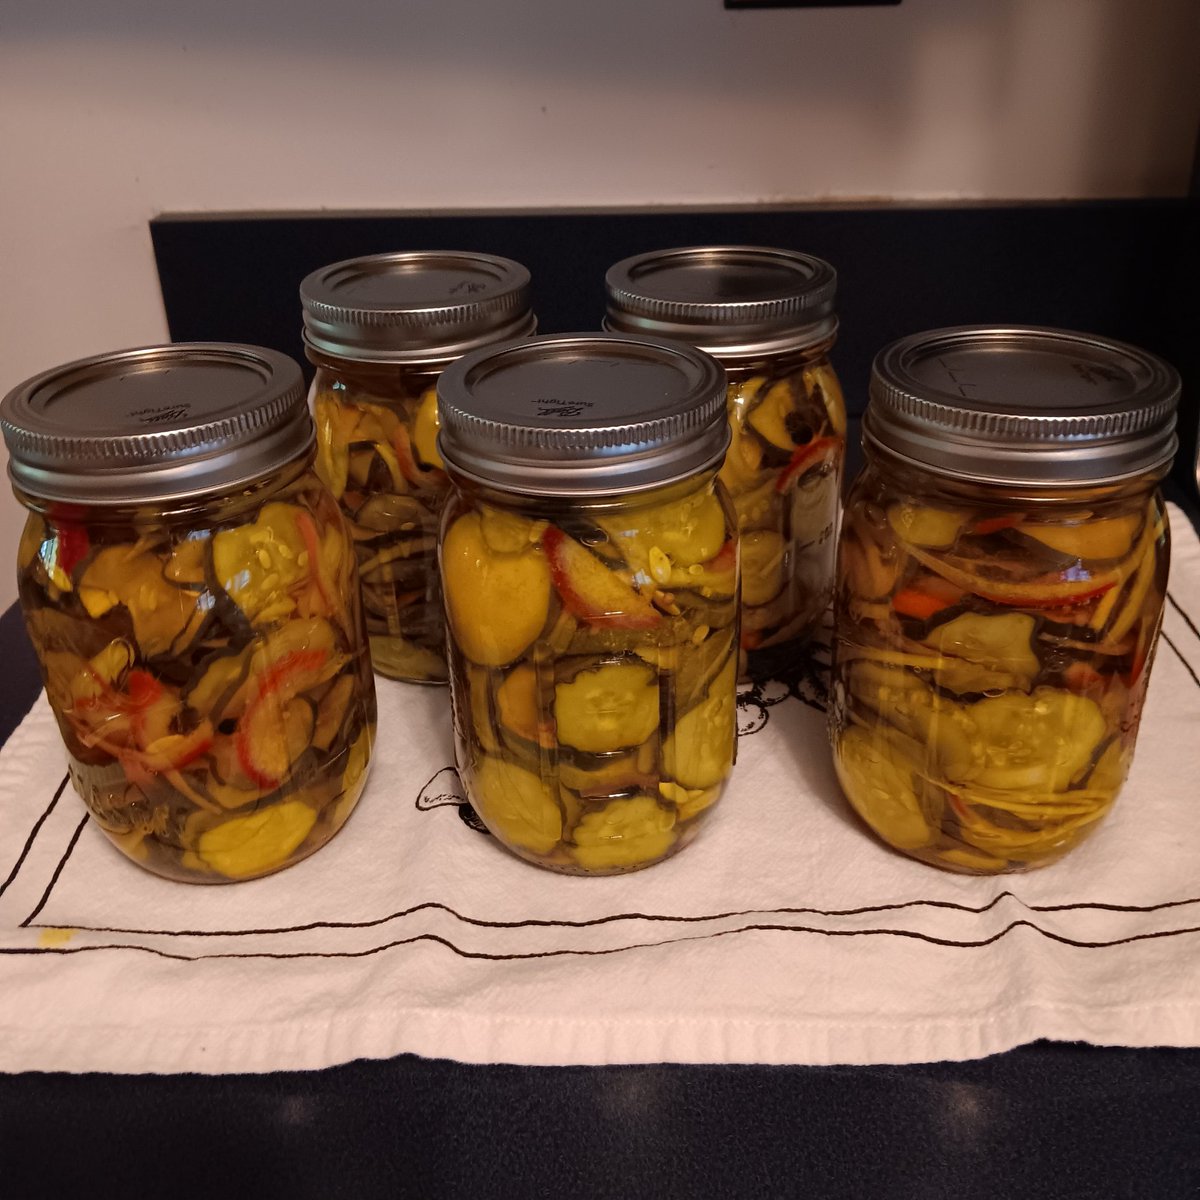 From vine to jar in an afternoon. Small batch of bread and butter pickles. #homecanning #gardentotable #foodsecurity #prepping